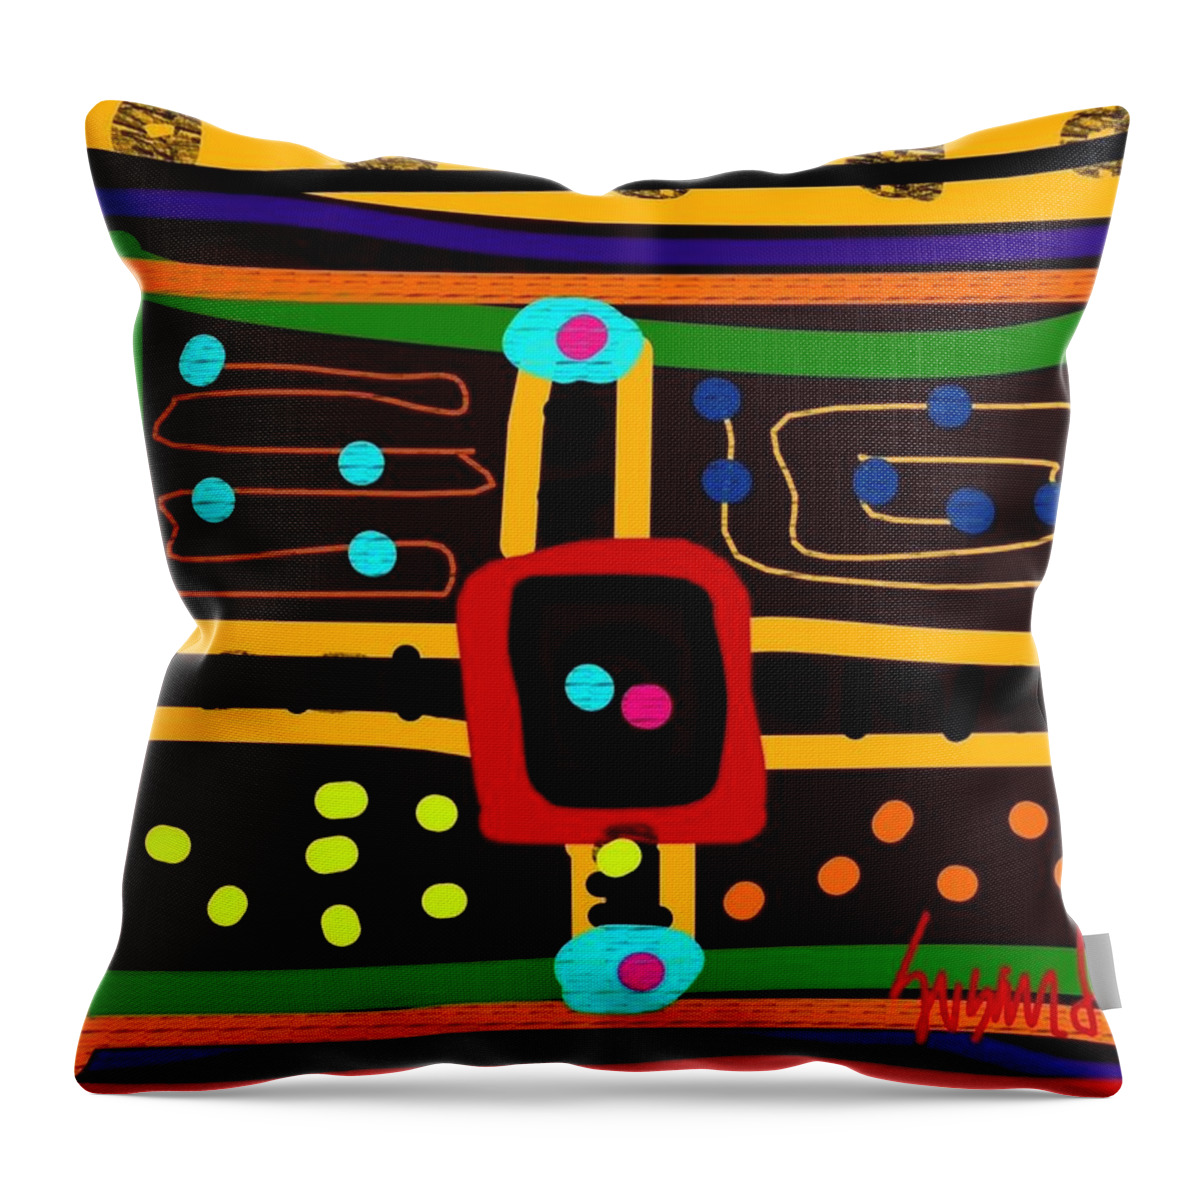 Abstract Throw Pillow featuring the digital art Parchoosie by Susan Fielder